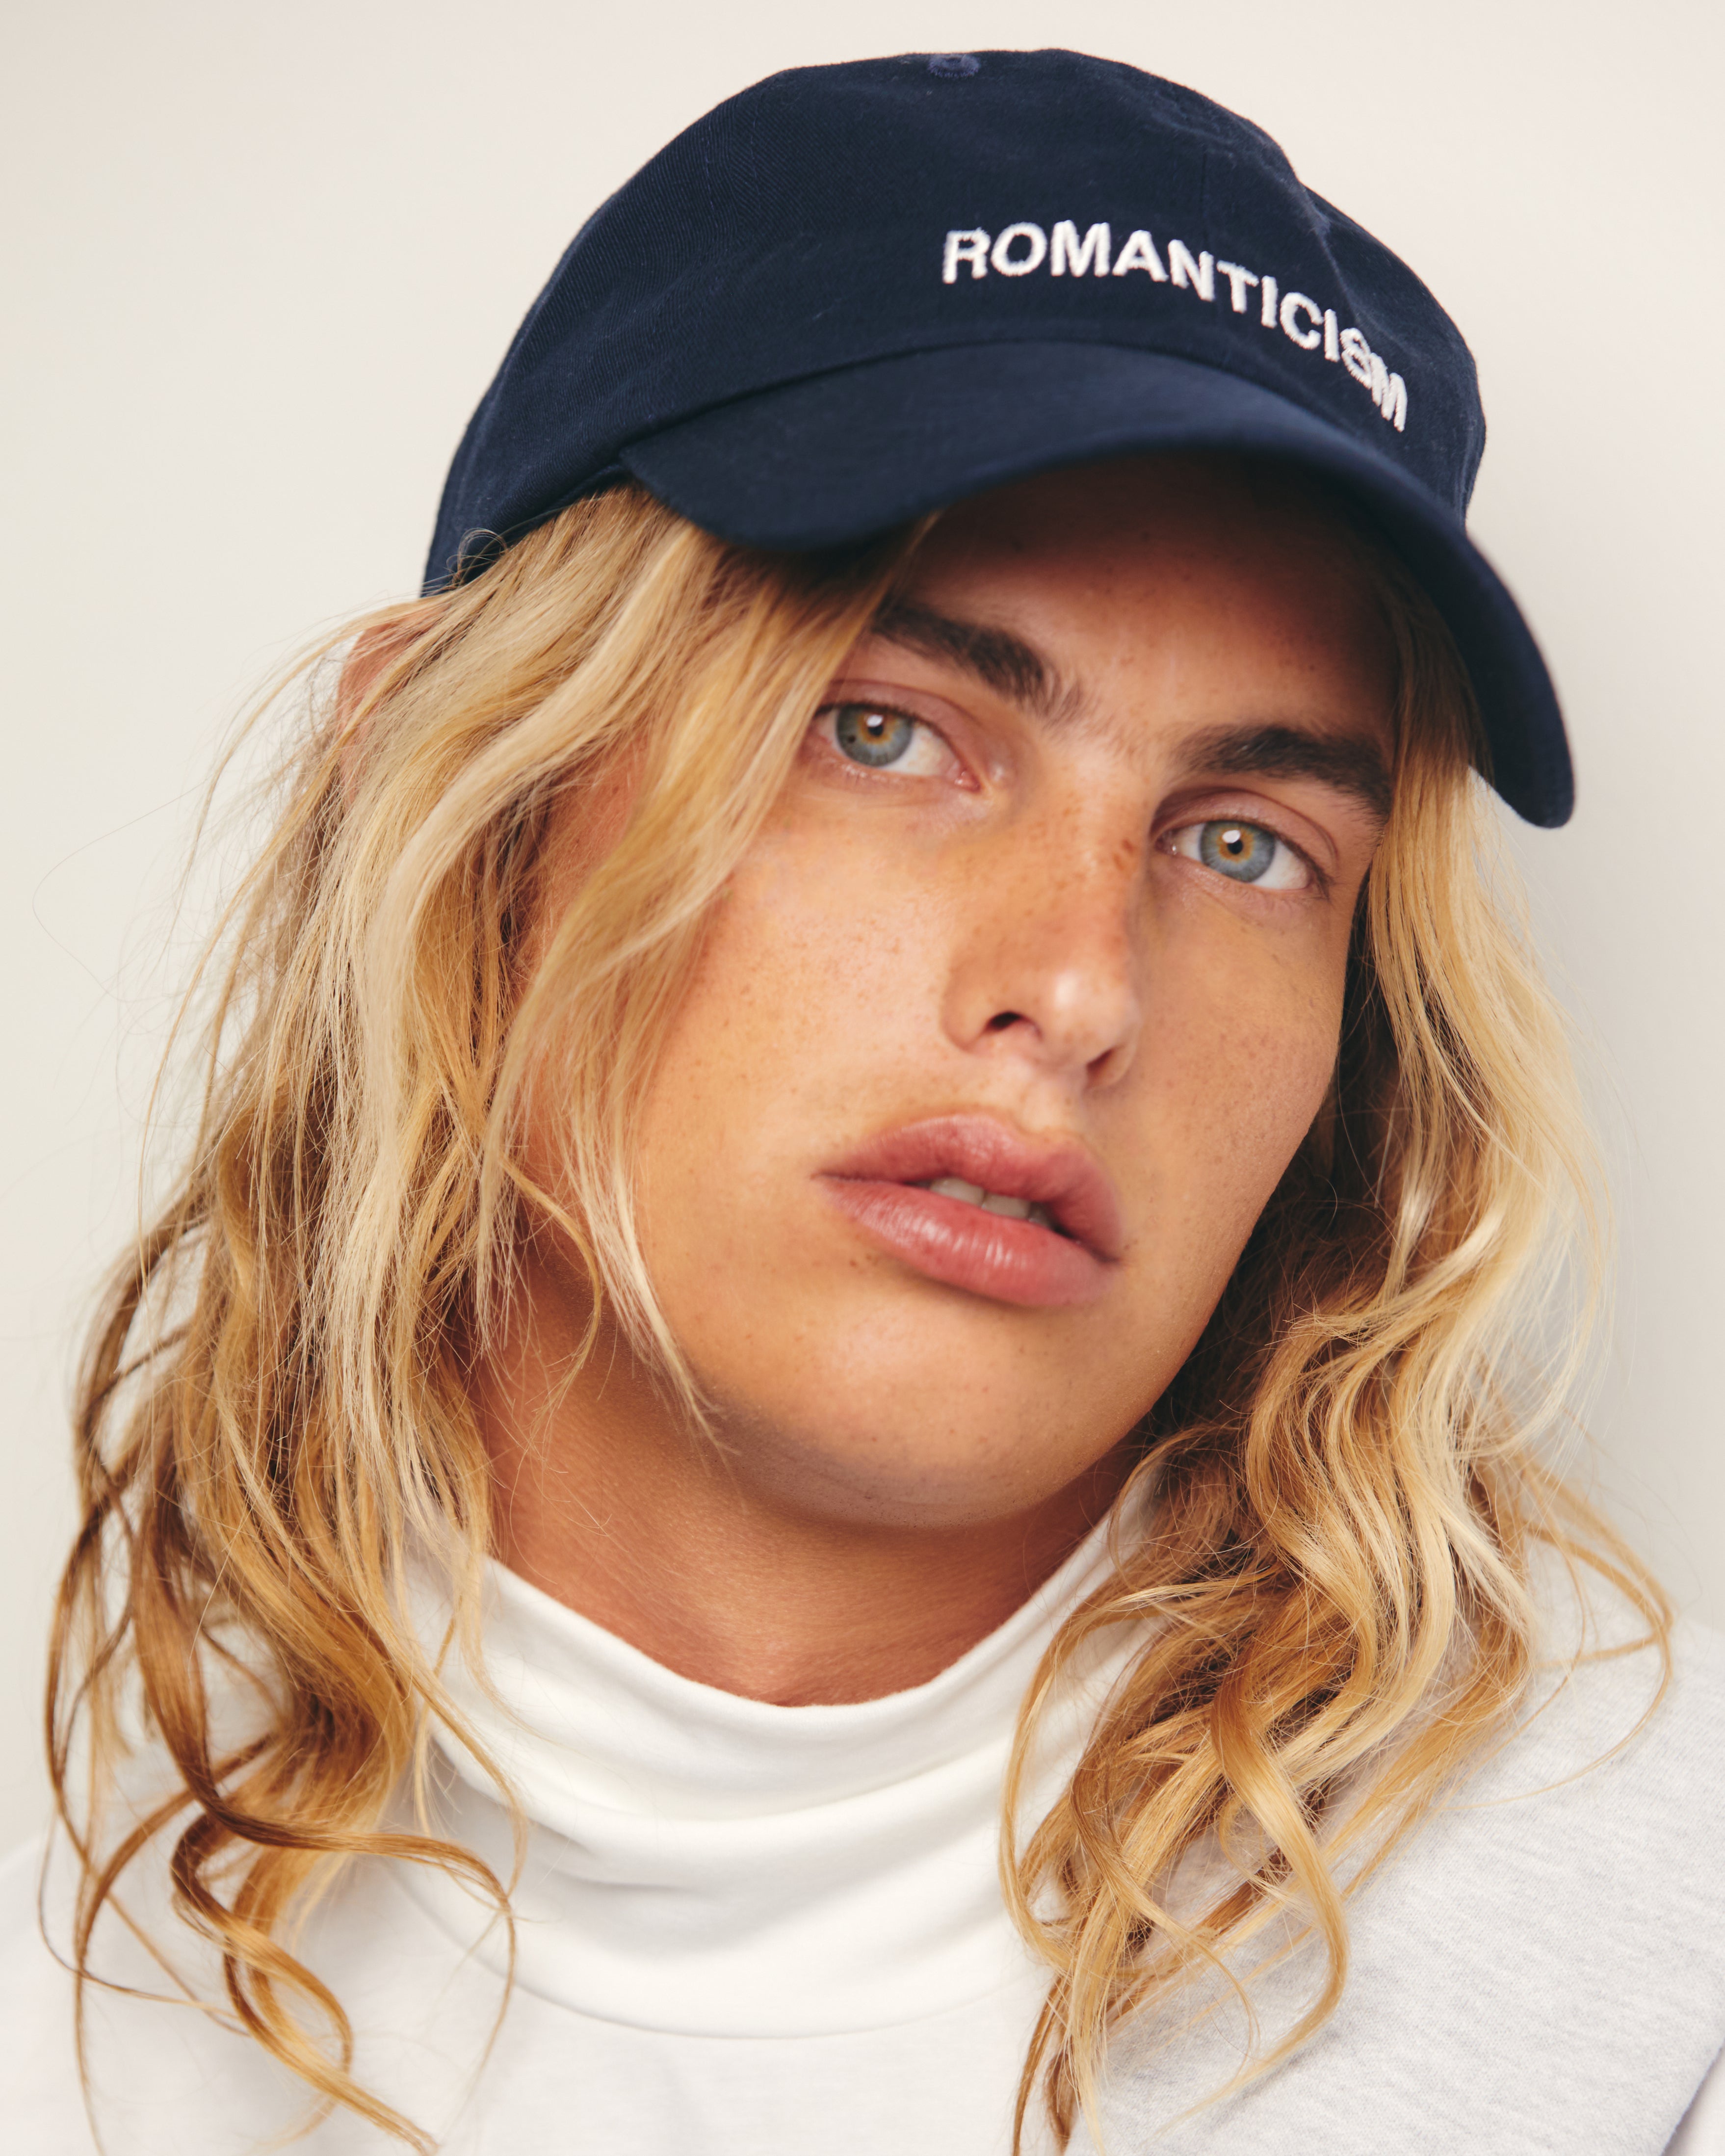 Lucas Ucedo wears Outsider Supply Navy Blue Dad Hat with White Romanticism Art Movement Embroidery Text.